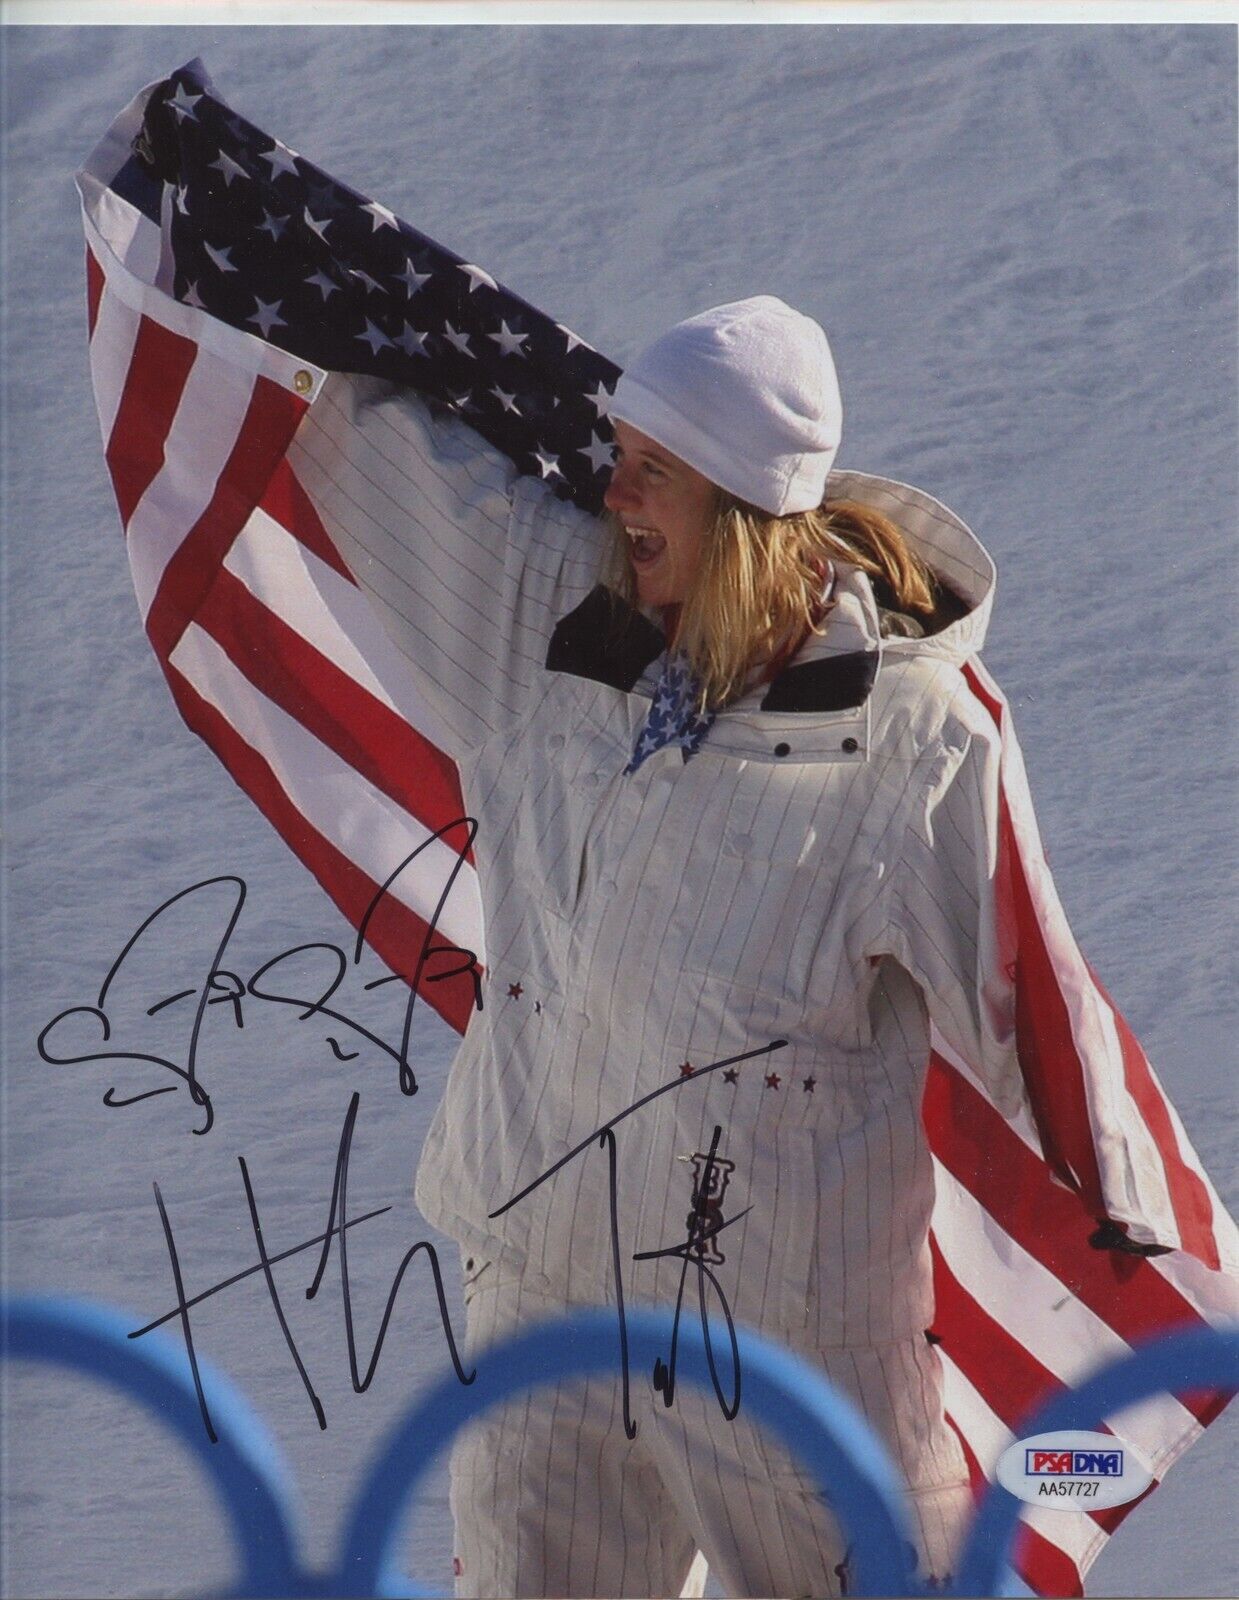 HANNAH TETER 8x10 Photo Poster painting Signed Autographed Auto PSA DNA Snowboardimg Olympics